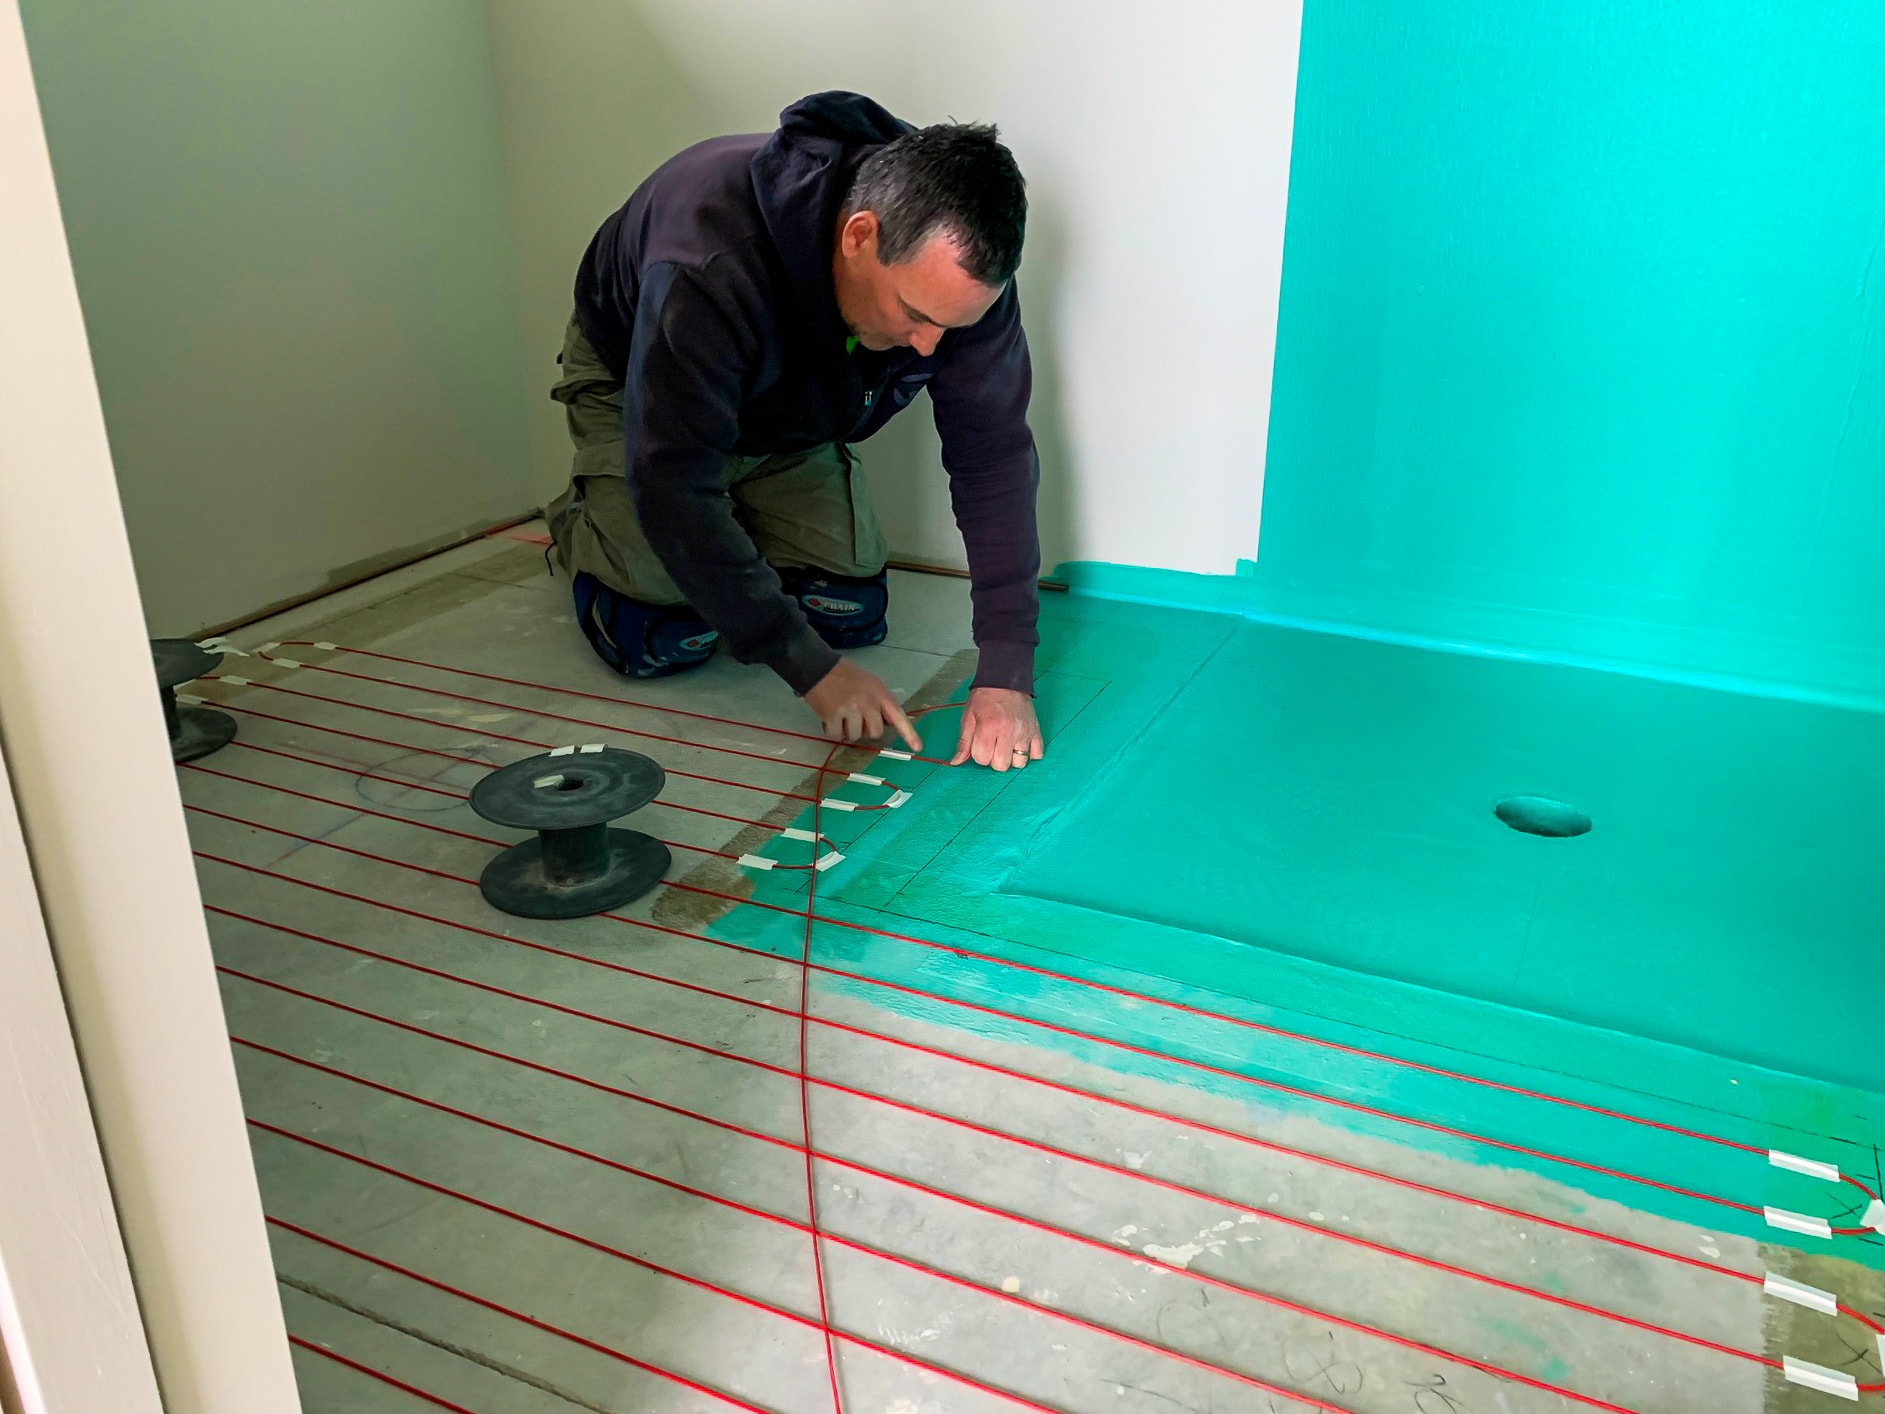 Thermafloor DIY electric under tile heating control systems, NZ